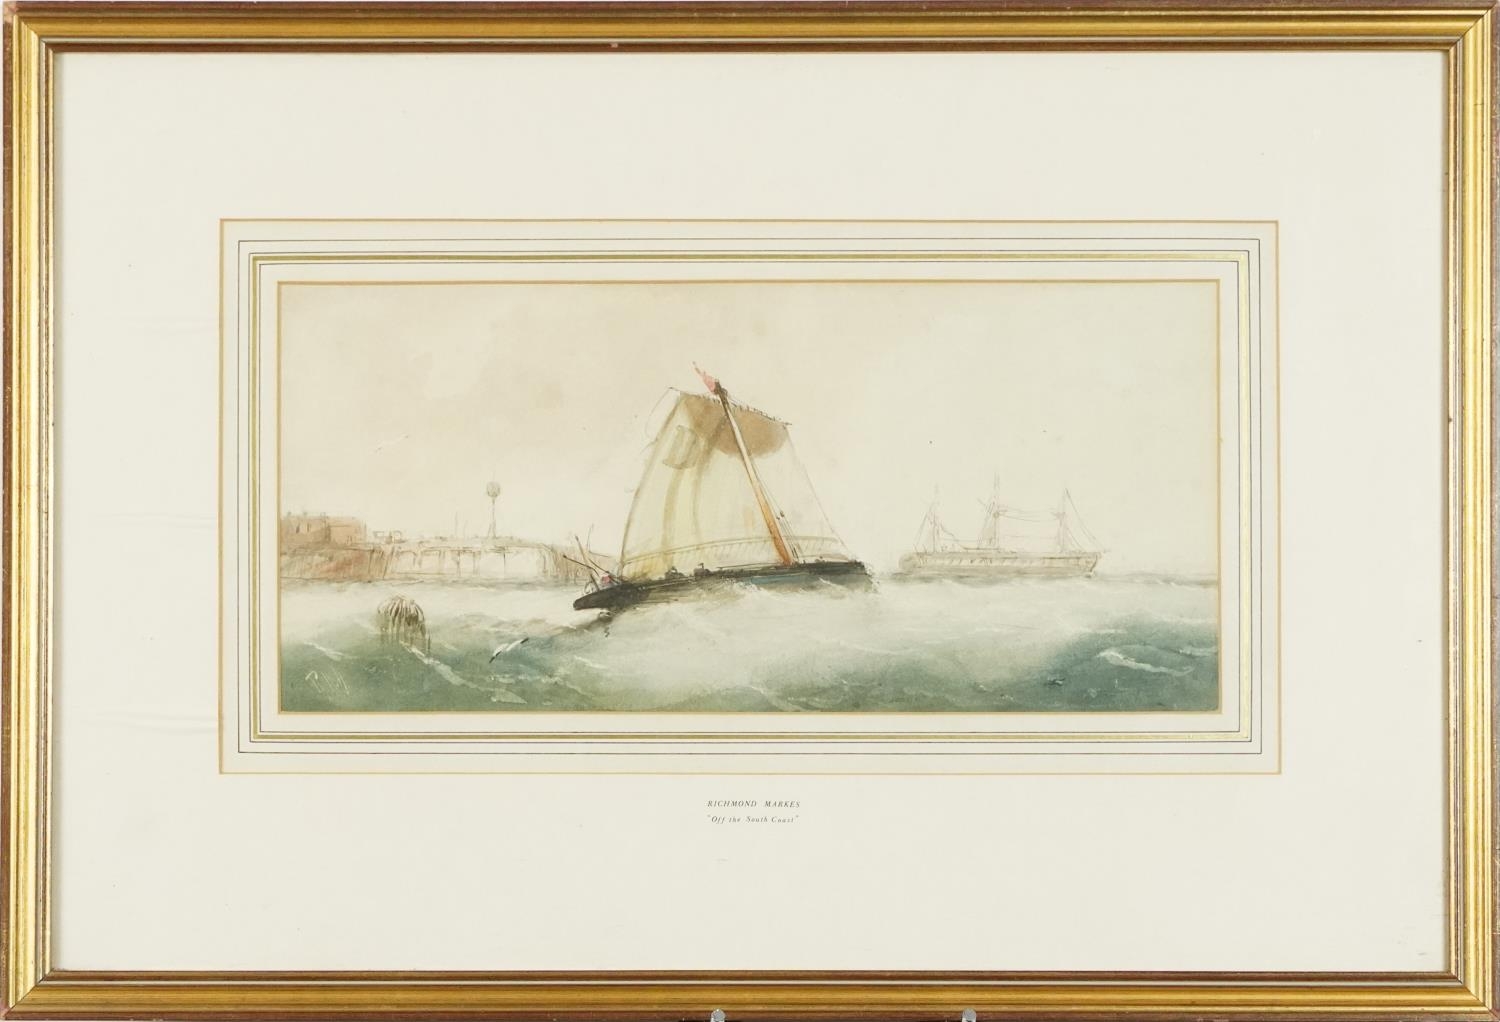 Richmond Markes - Off the South Coast, Victorian naval interest watercolour, mounted, framed and - Image 2 of 5